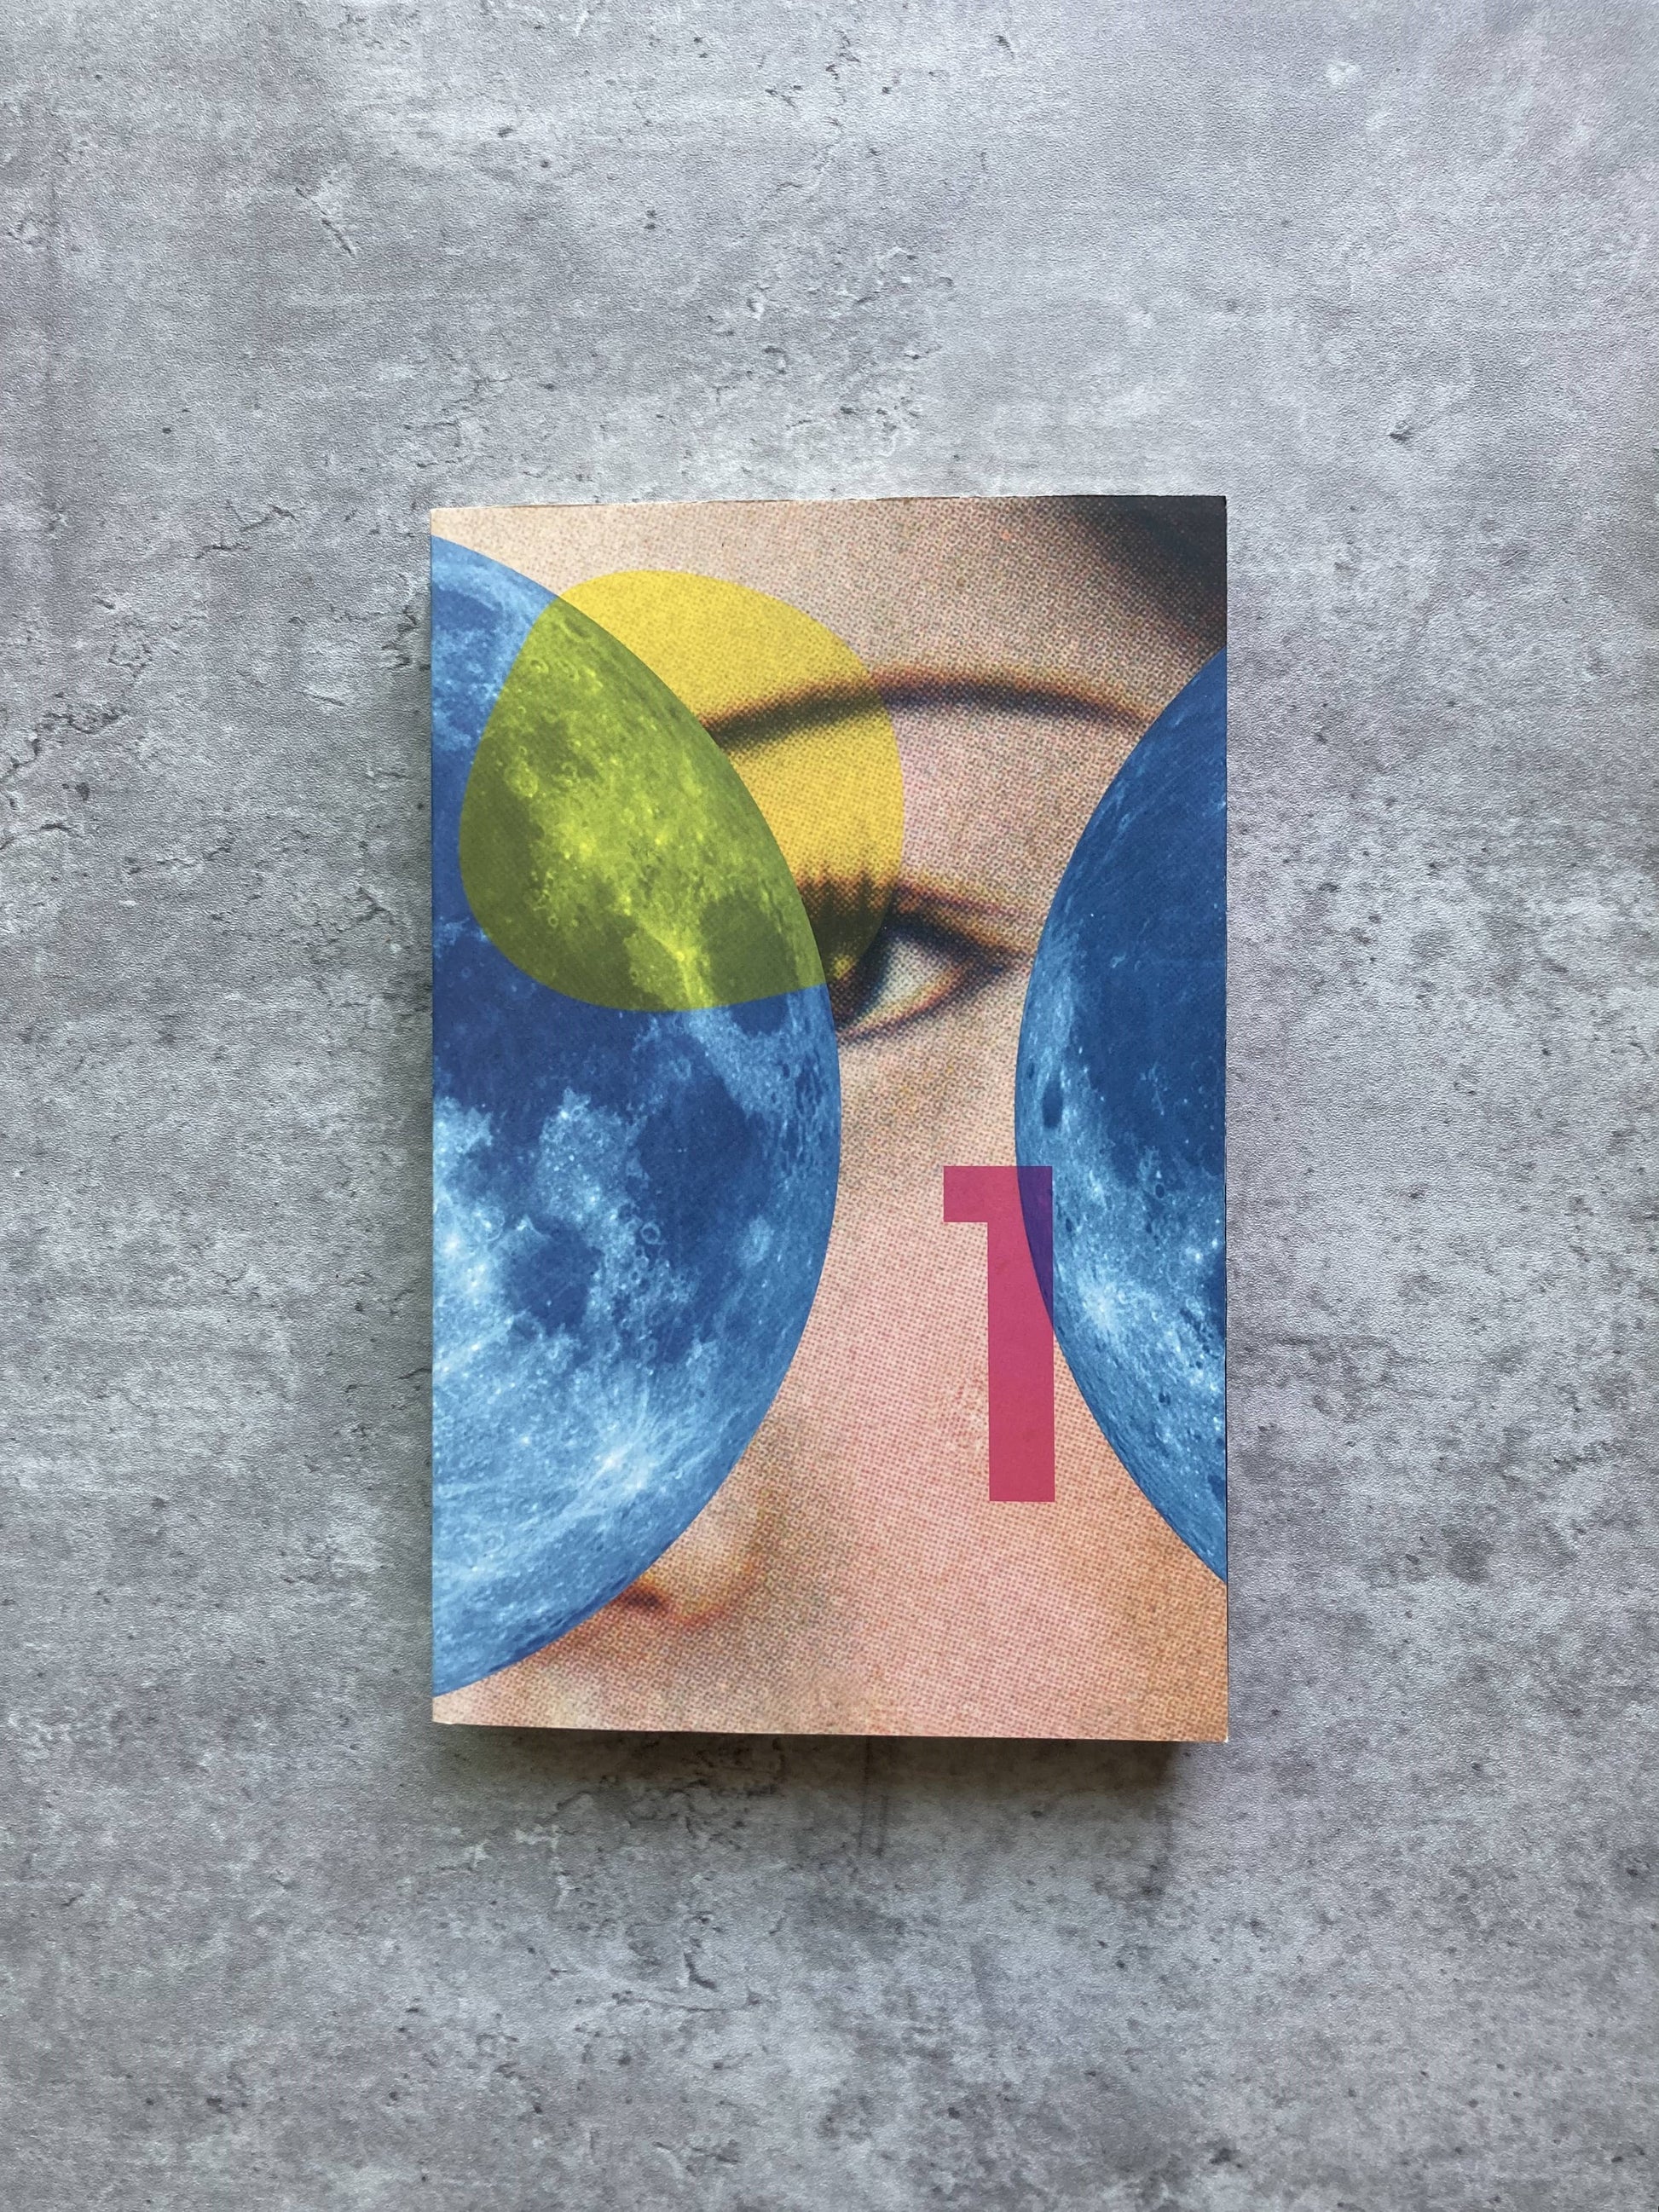 Boxed set of Haruki Murakami's 1Q84. Shop all new and used books online at The Stone Circle, the only online bookstore in Los Angeles, California. 